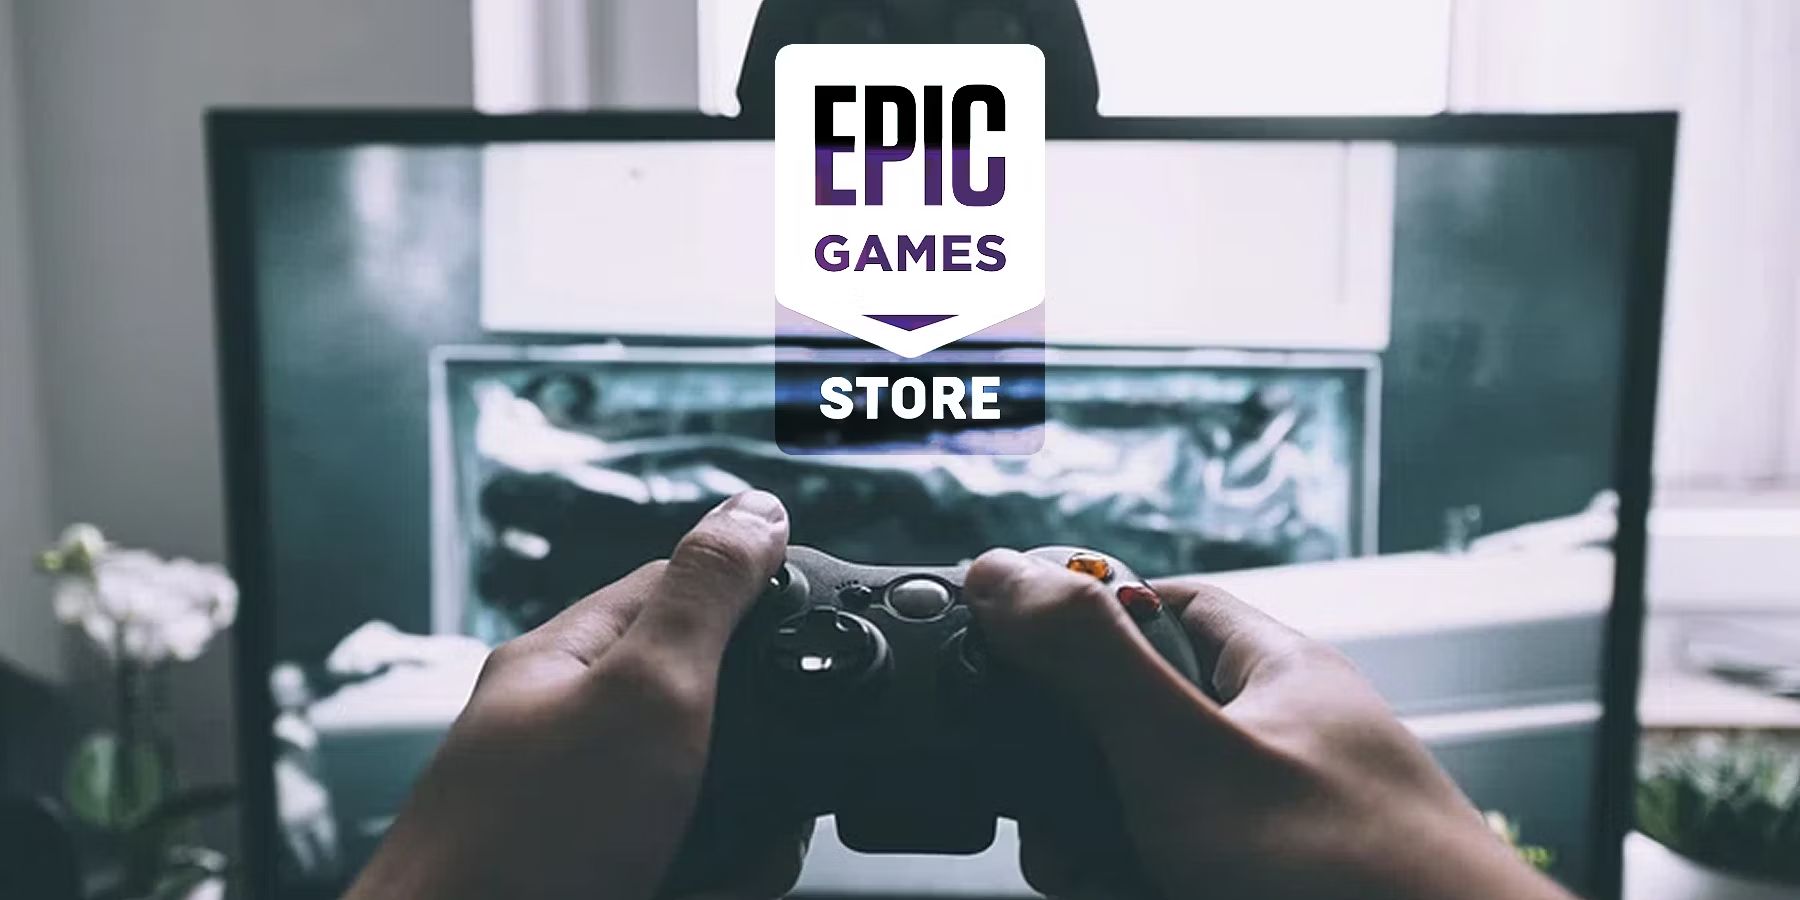 epic-games-store-controller-monitor-room